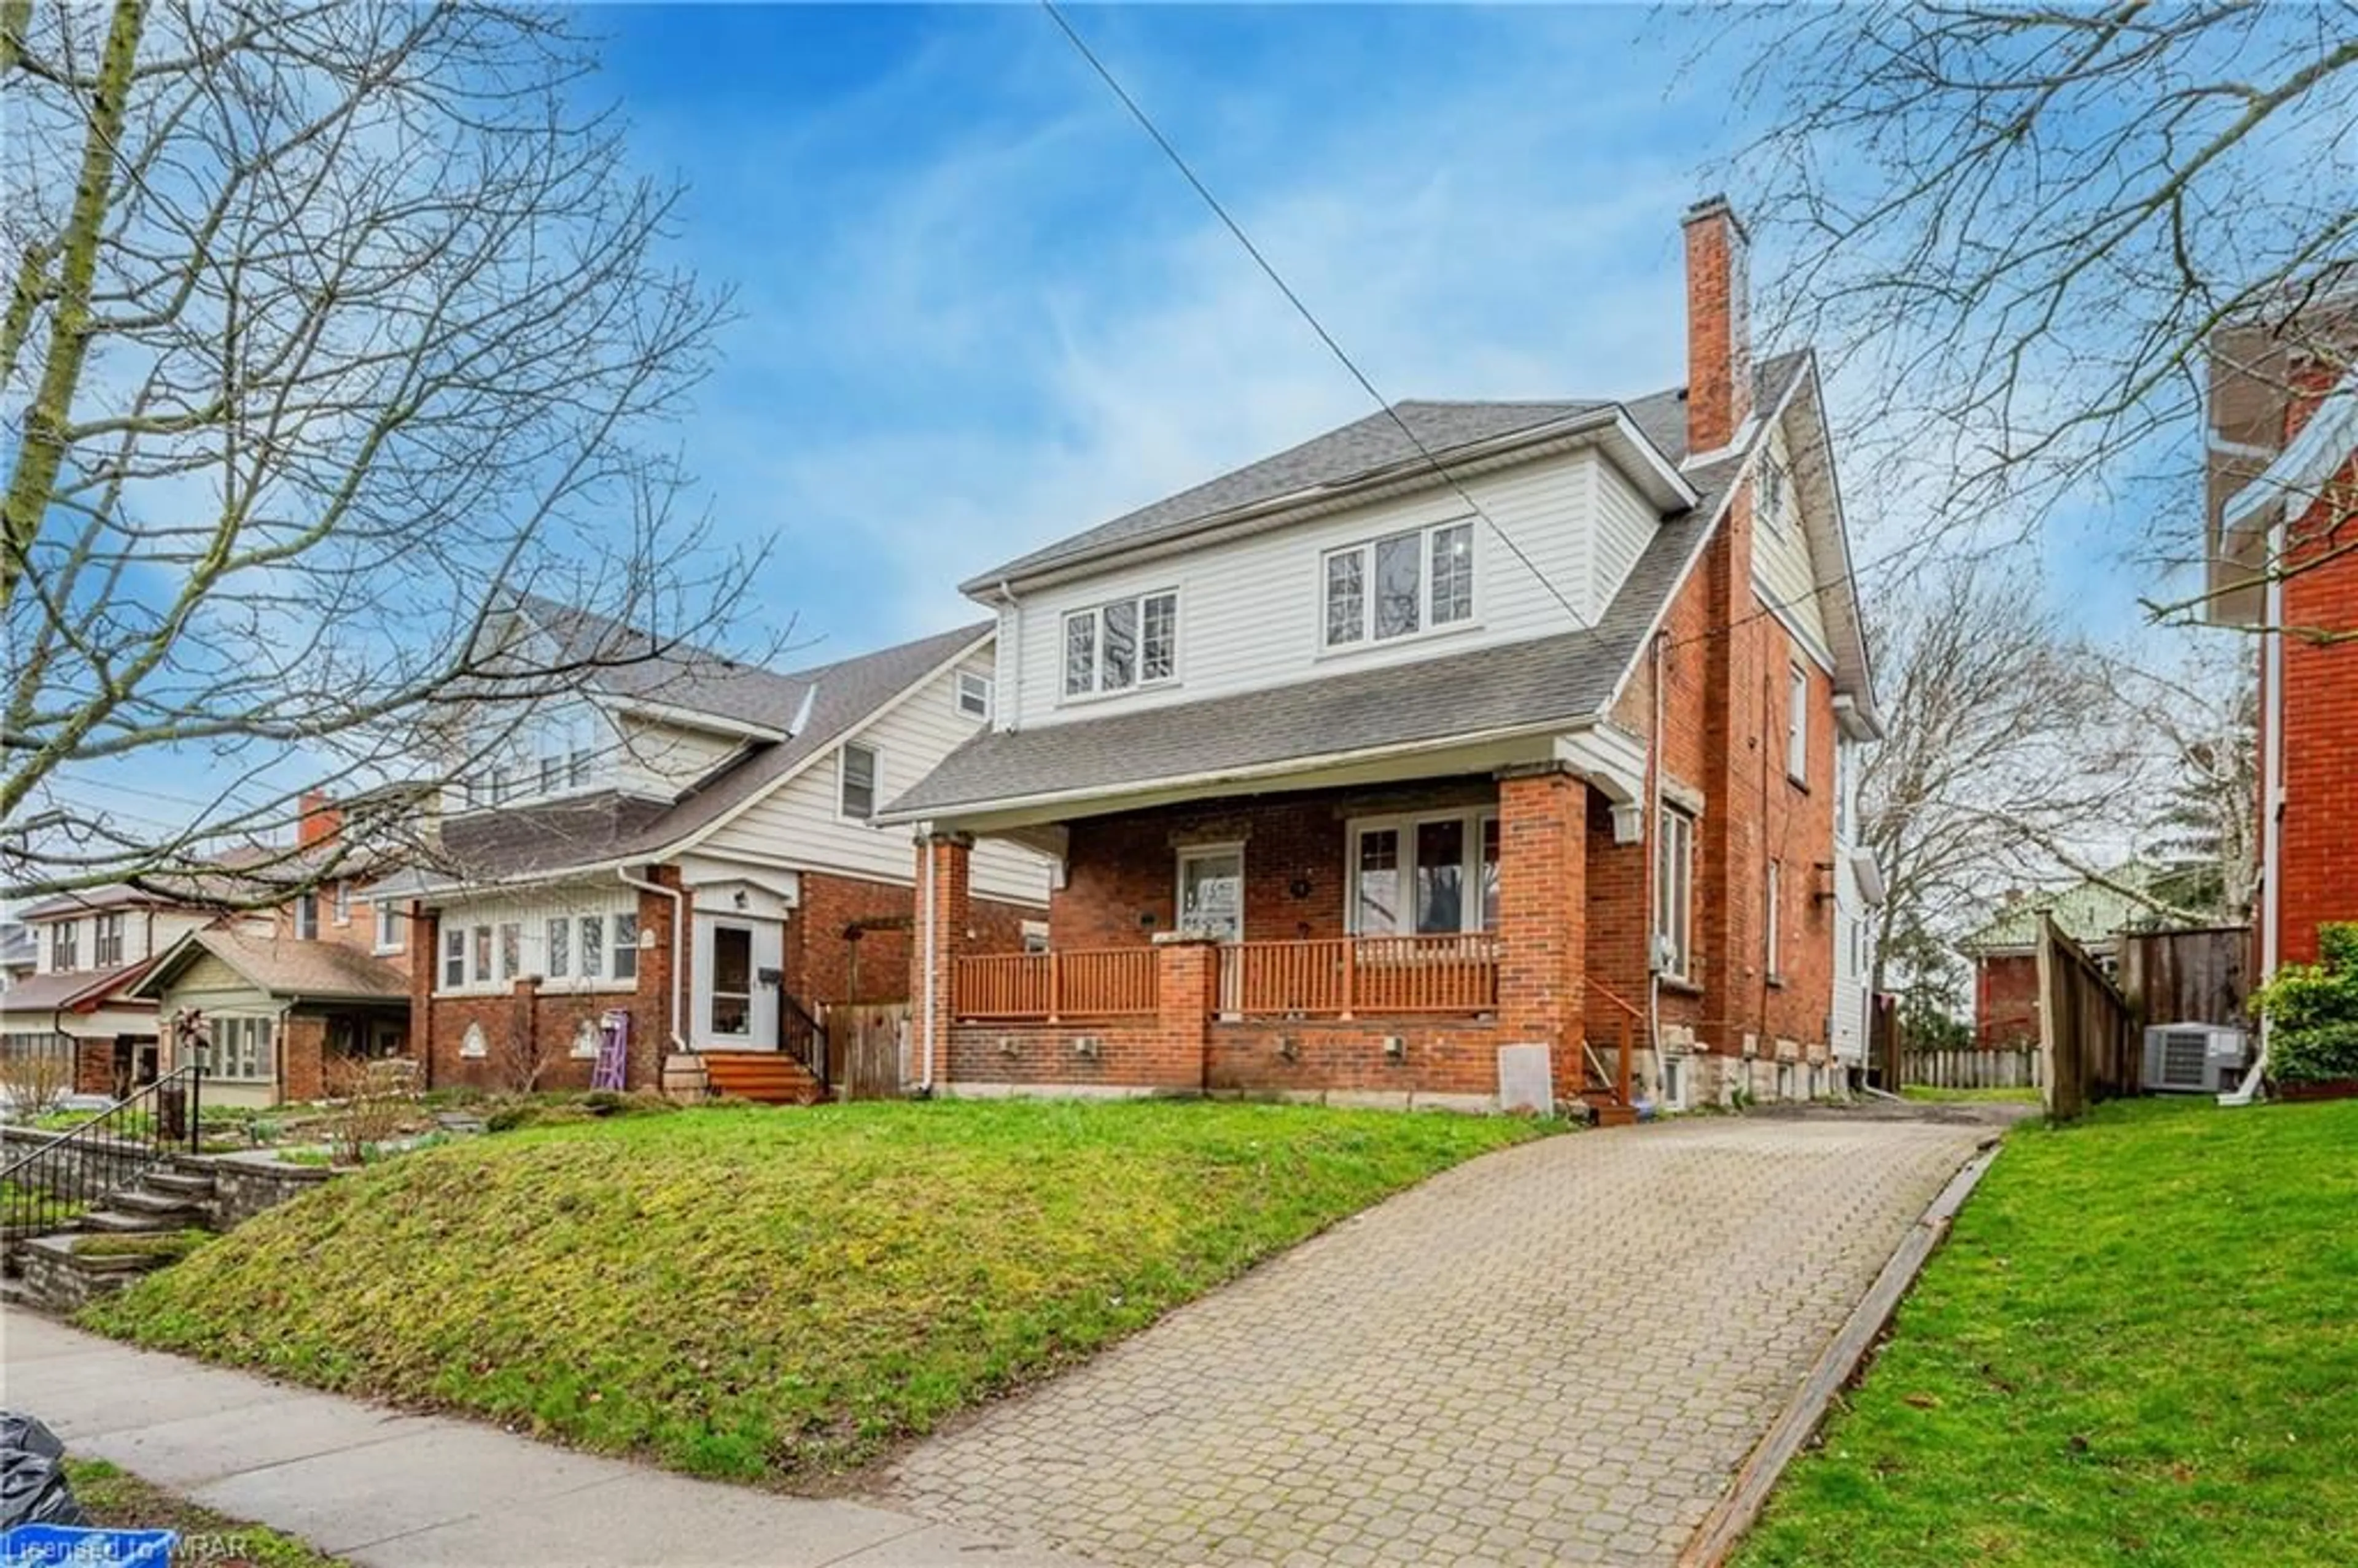 Home with brick exterior material for 31 Louisa St, Kitchener Ontario N2H 5L7